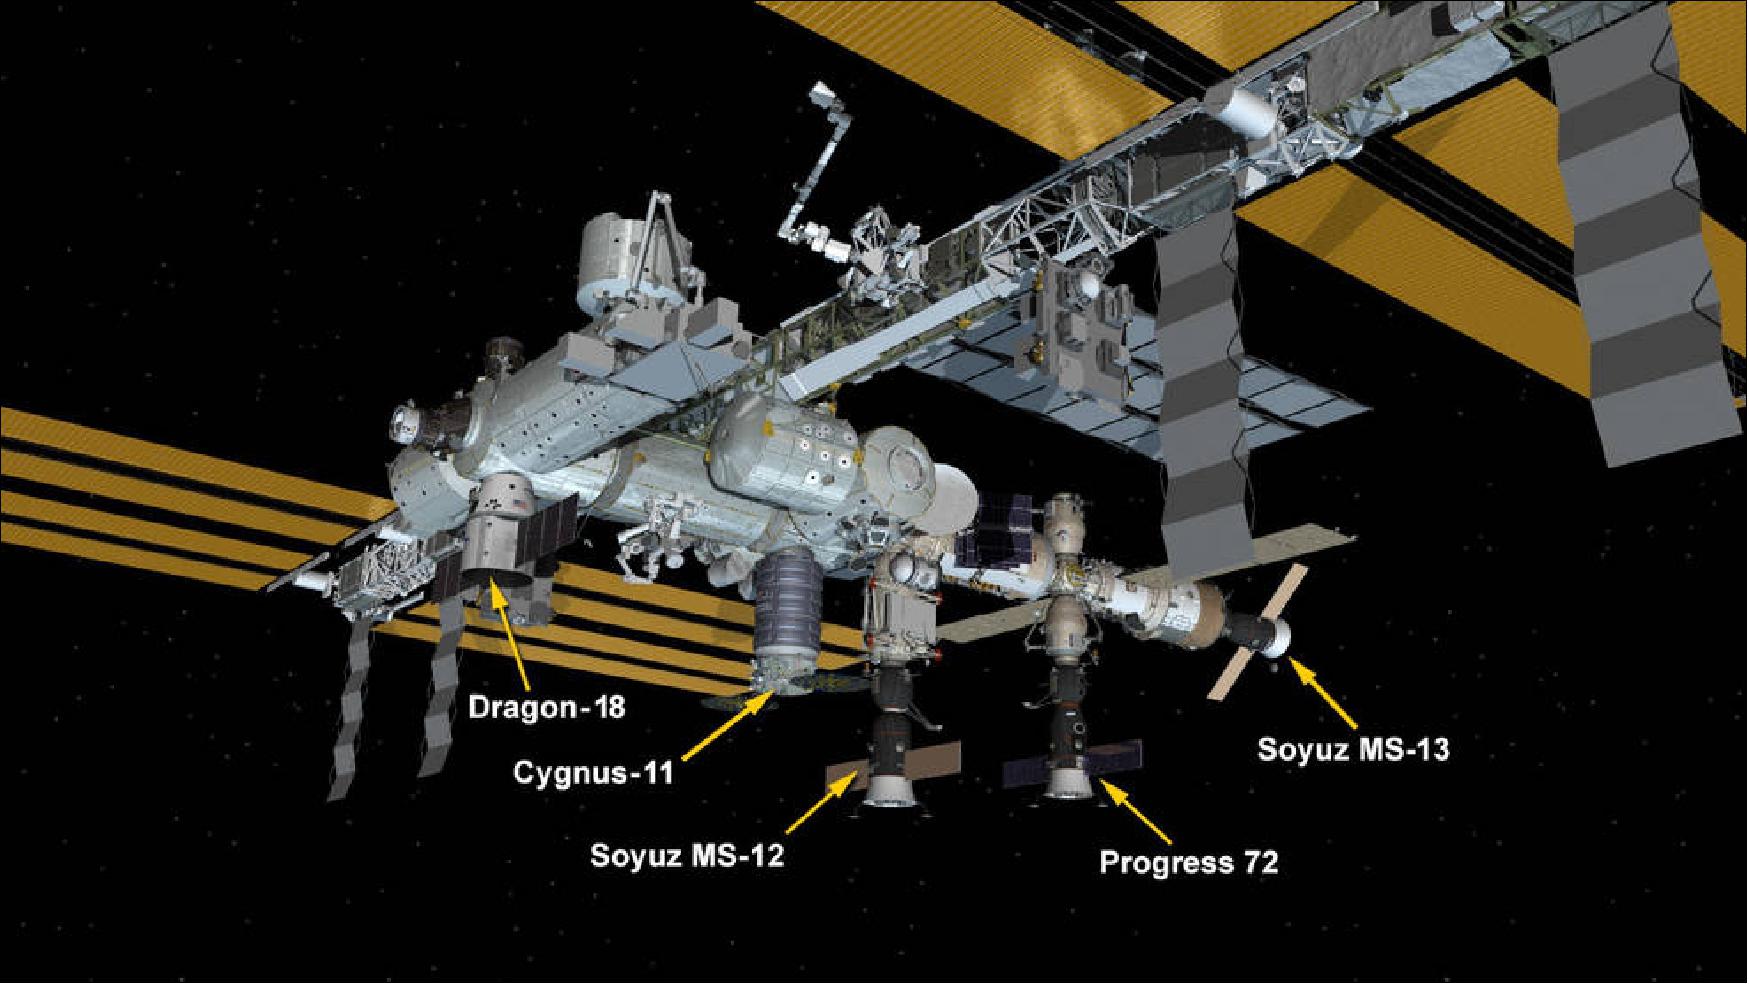 Figure 8: July 27, 2019: International Space Station Configuration. Five spaceships are parked at the space station including the SpaceX Dragon cargo craft, Northrop Grumman's Cygnus space freighter, the Progress 72 resupply ship and the Soyuz MS-12 and MS-13 crew ships (image credit: NASA)